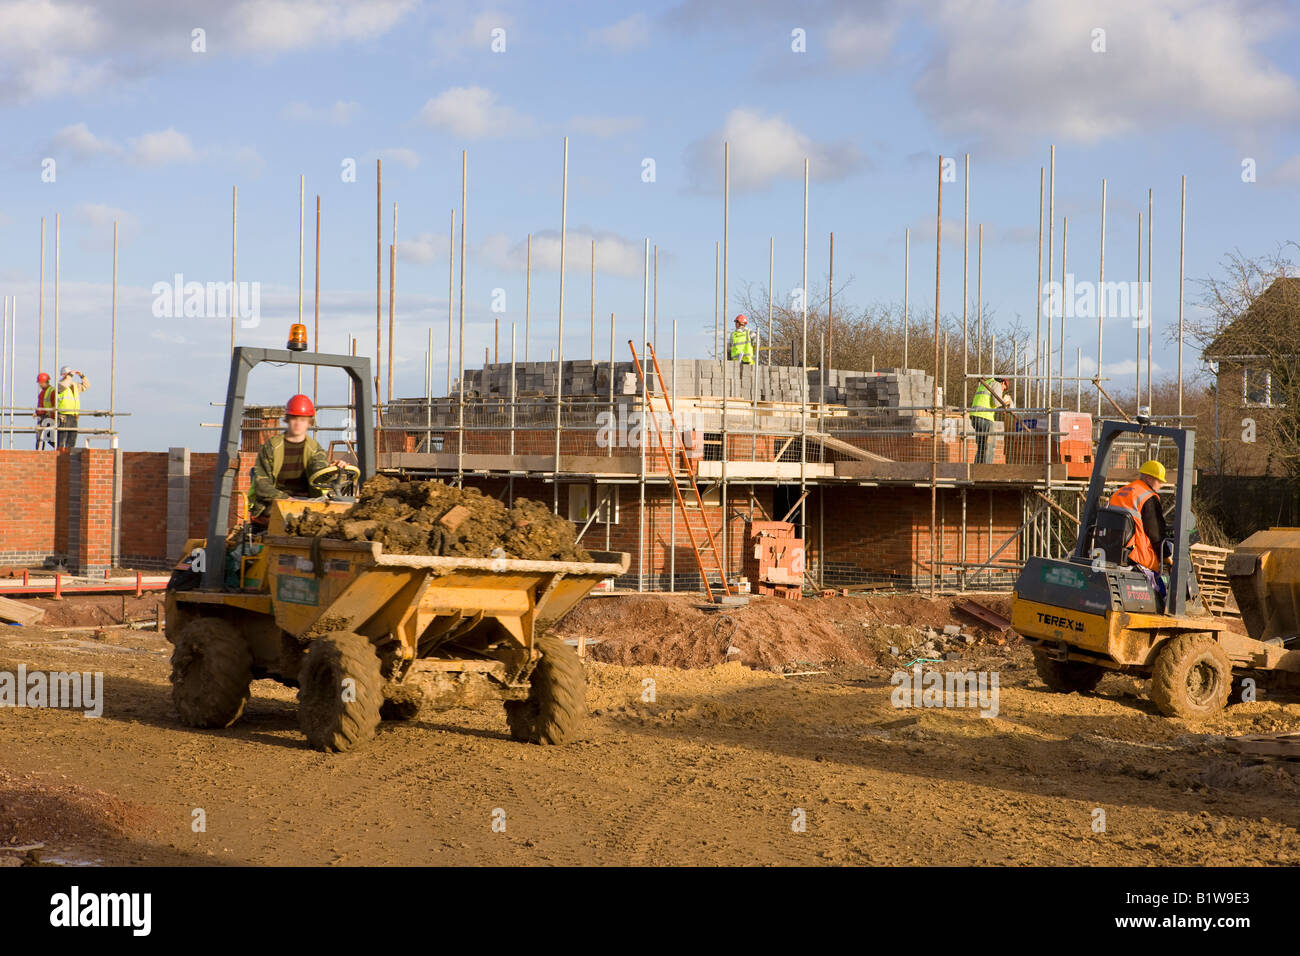 Construction of a detatched 4 bedroom house Stock Photo